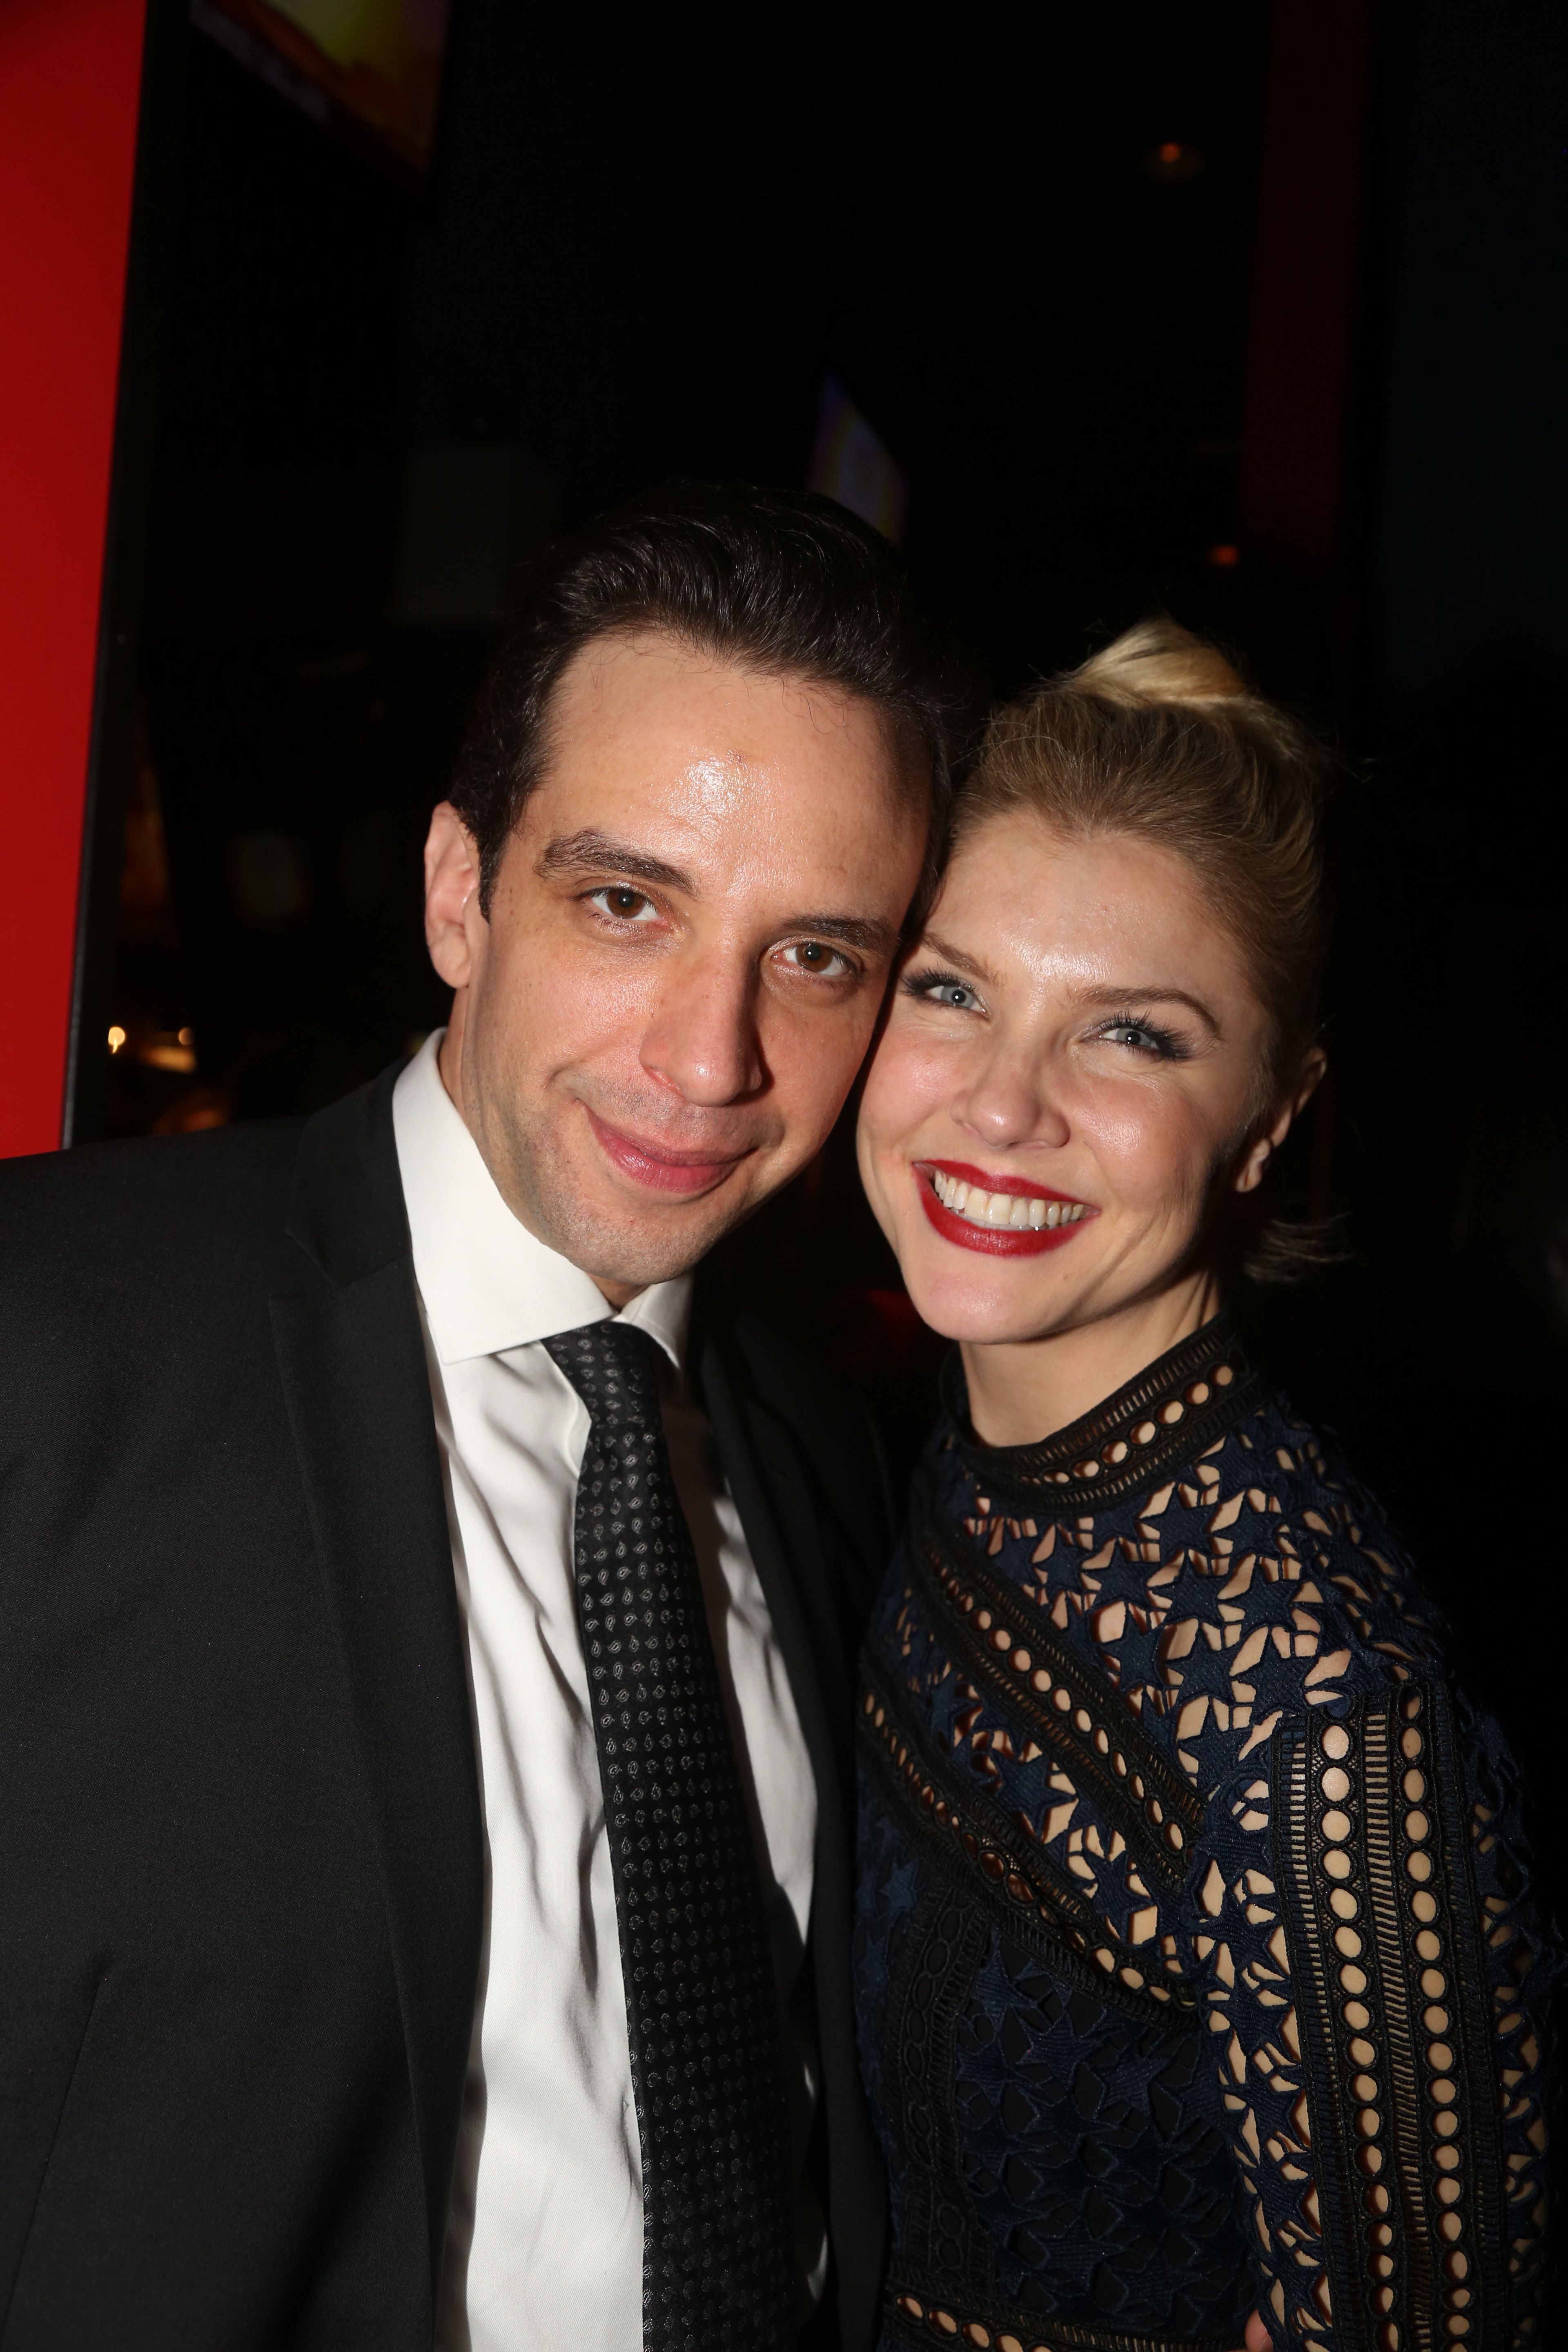 Late Nick Cordero and his wife Amanda Kloots pose at the after party for Broadway Series "Crazy For You" One Night Only Production at Planet Hollywood Times Square on February 19, 2017 in New York City | Photo: Getty Images 